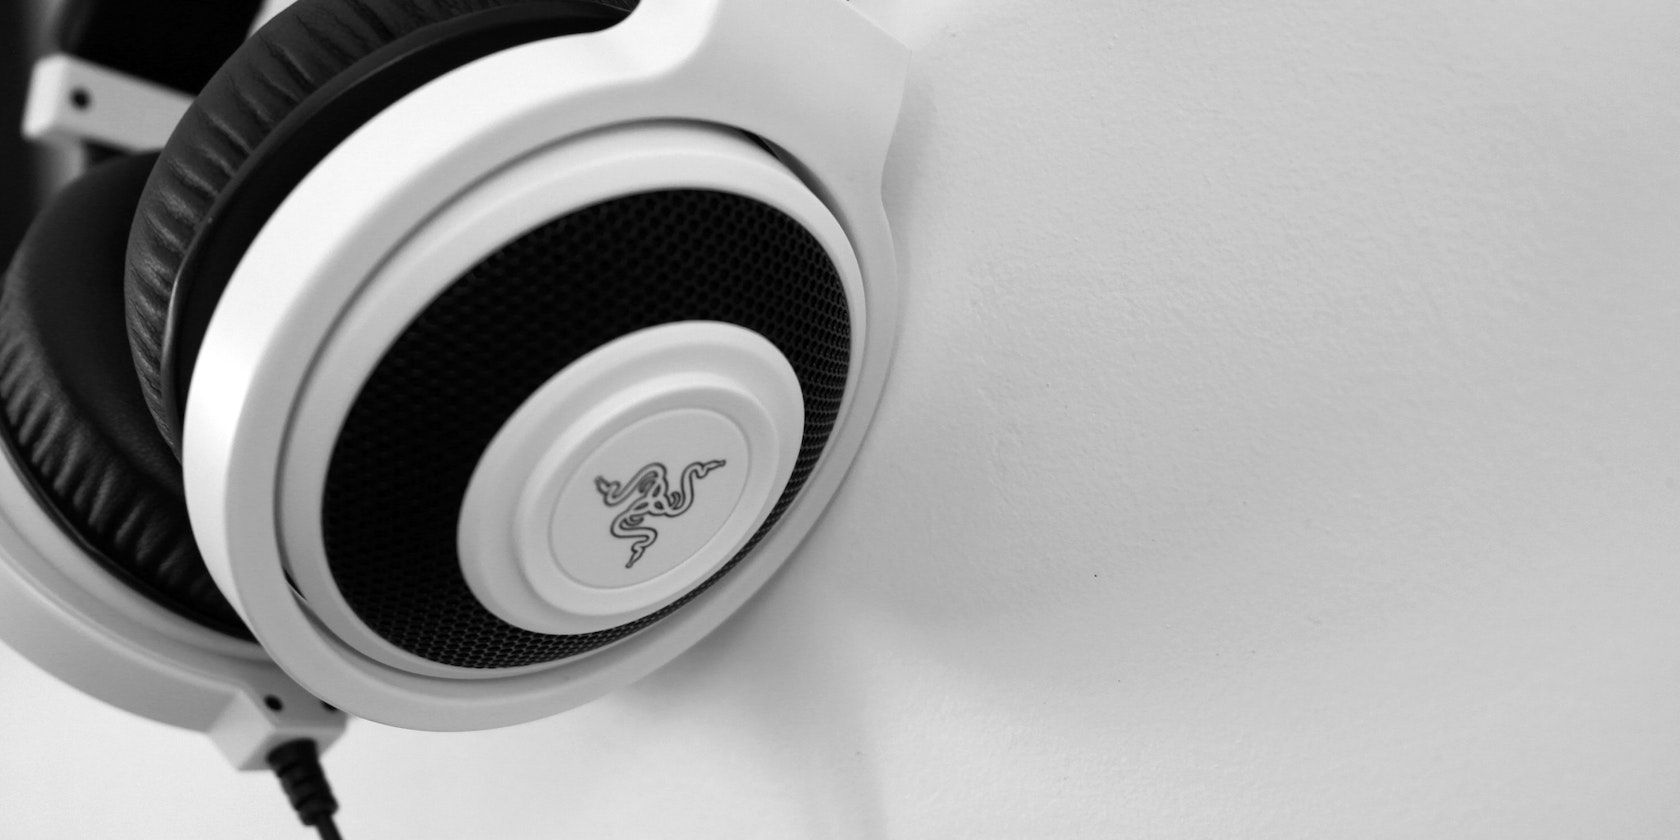 headphones isolated against a white background